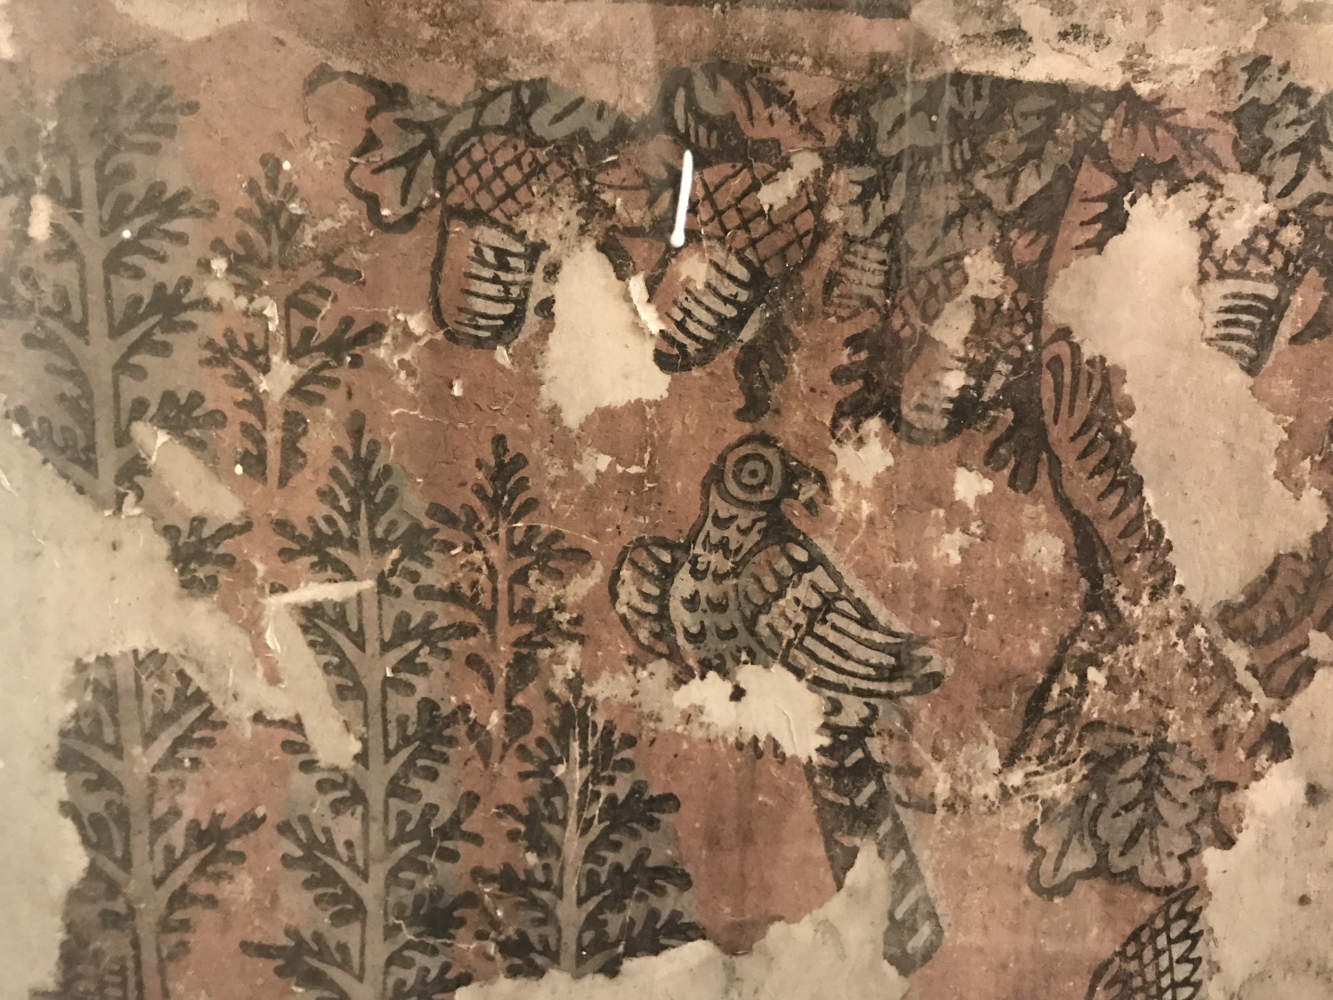 The design shows trees, acorns and a bird with a long tail